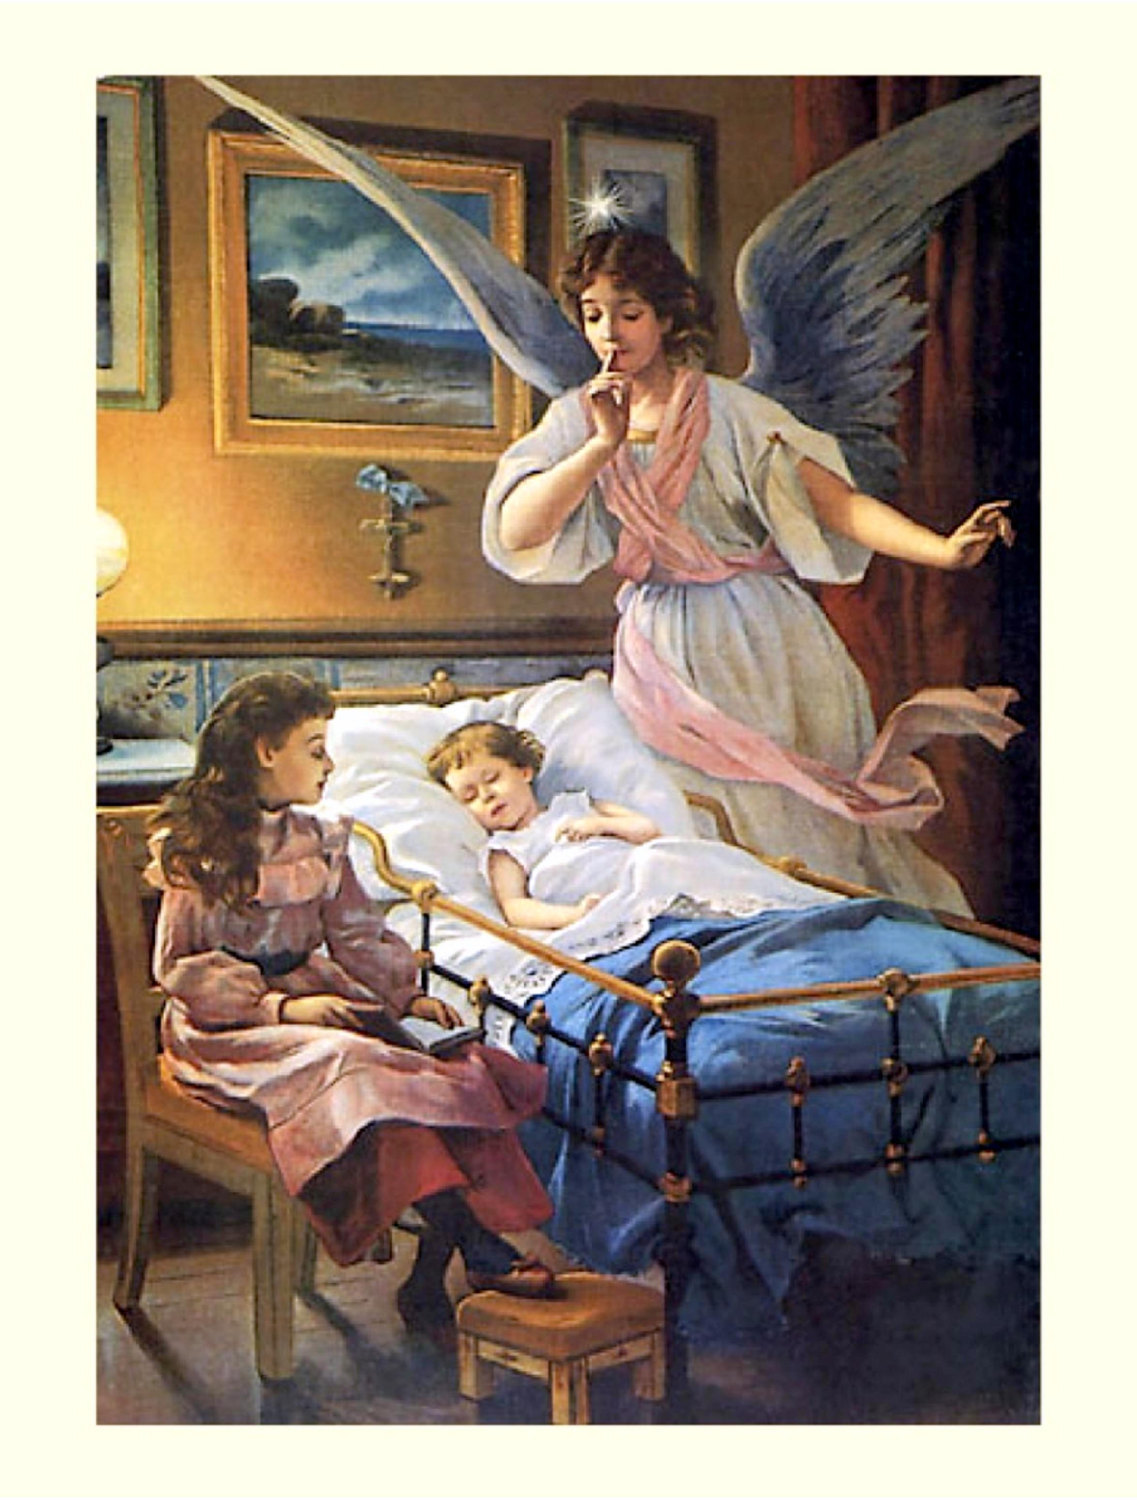 Angel Guardian at Bedside 11x14 canvas print  Angel watches over ill child in cr - $23.00